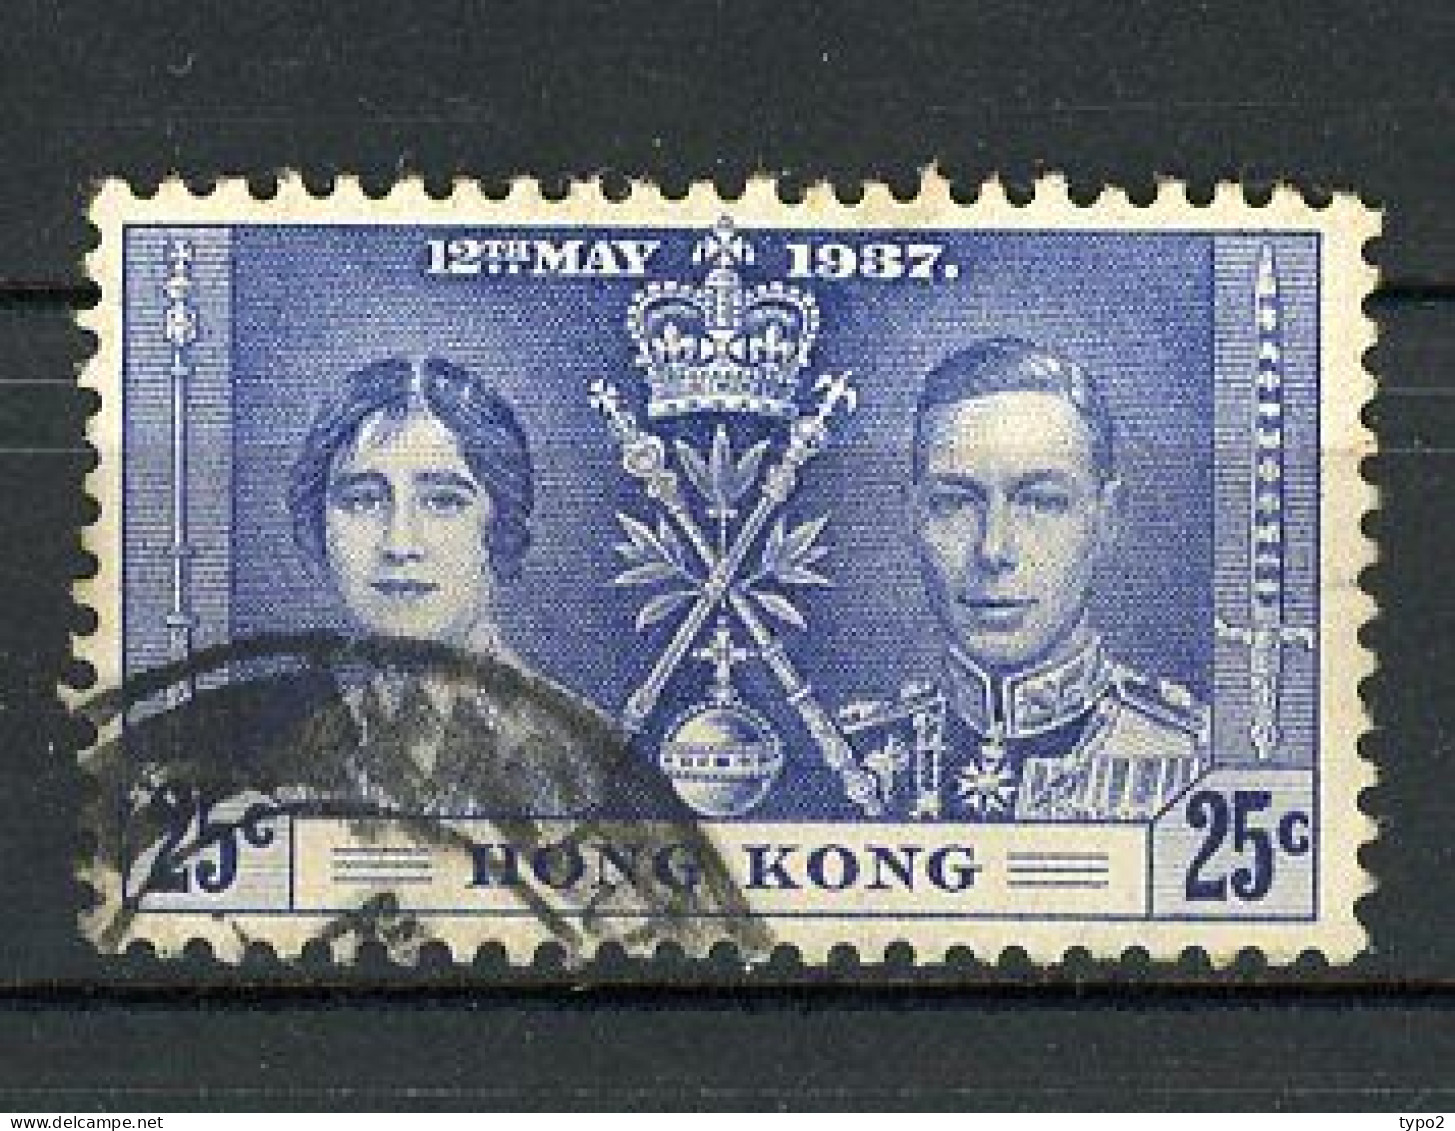 H-K  Yv. N° 139 SG N°139  (o)  25c Bleu Couronnement George VI Cote 4 Euro BE  2 Scans - Used Stamps